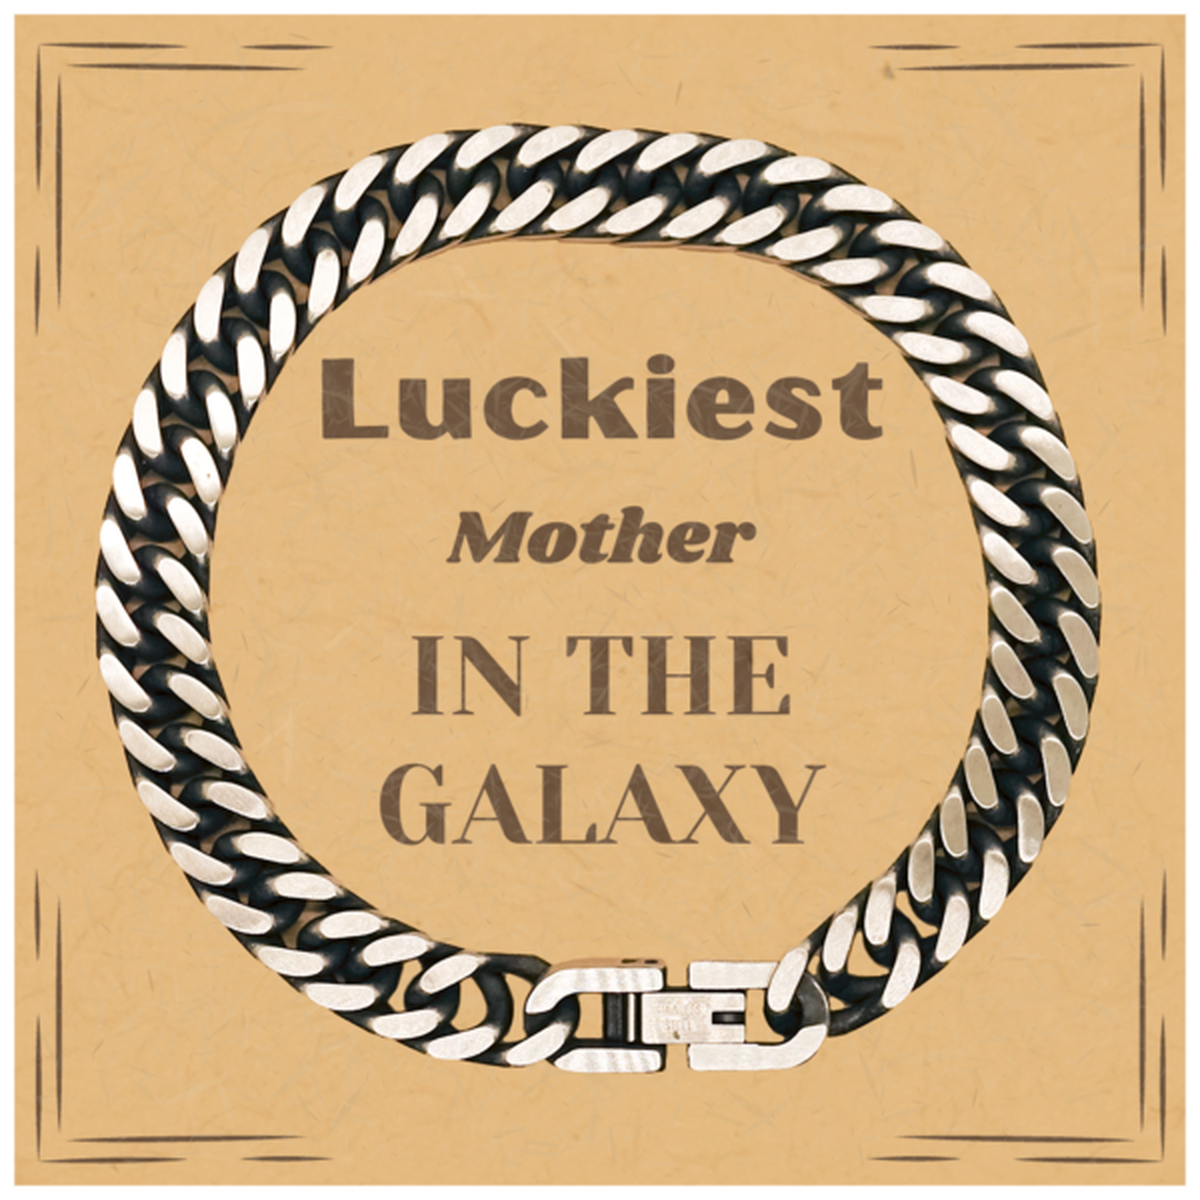 Luckiest Mother in the Galaxy, To My Mother Message Card Gifts, Christmas Mother Cuban Link Chain Bracelet Gifts, X-mas Birthday Unique Gifts For Mother Men Women